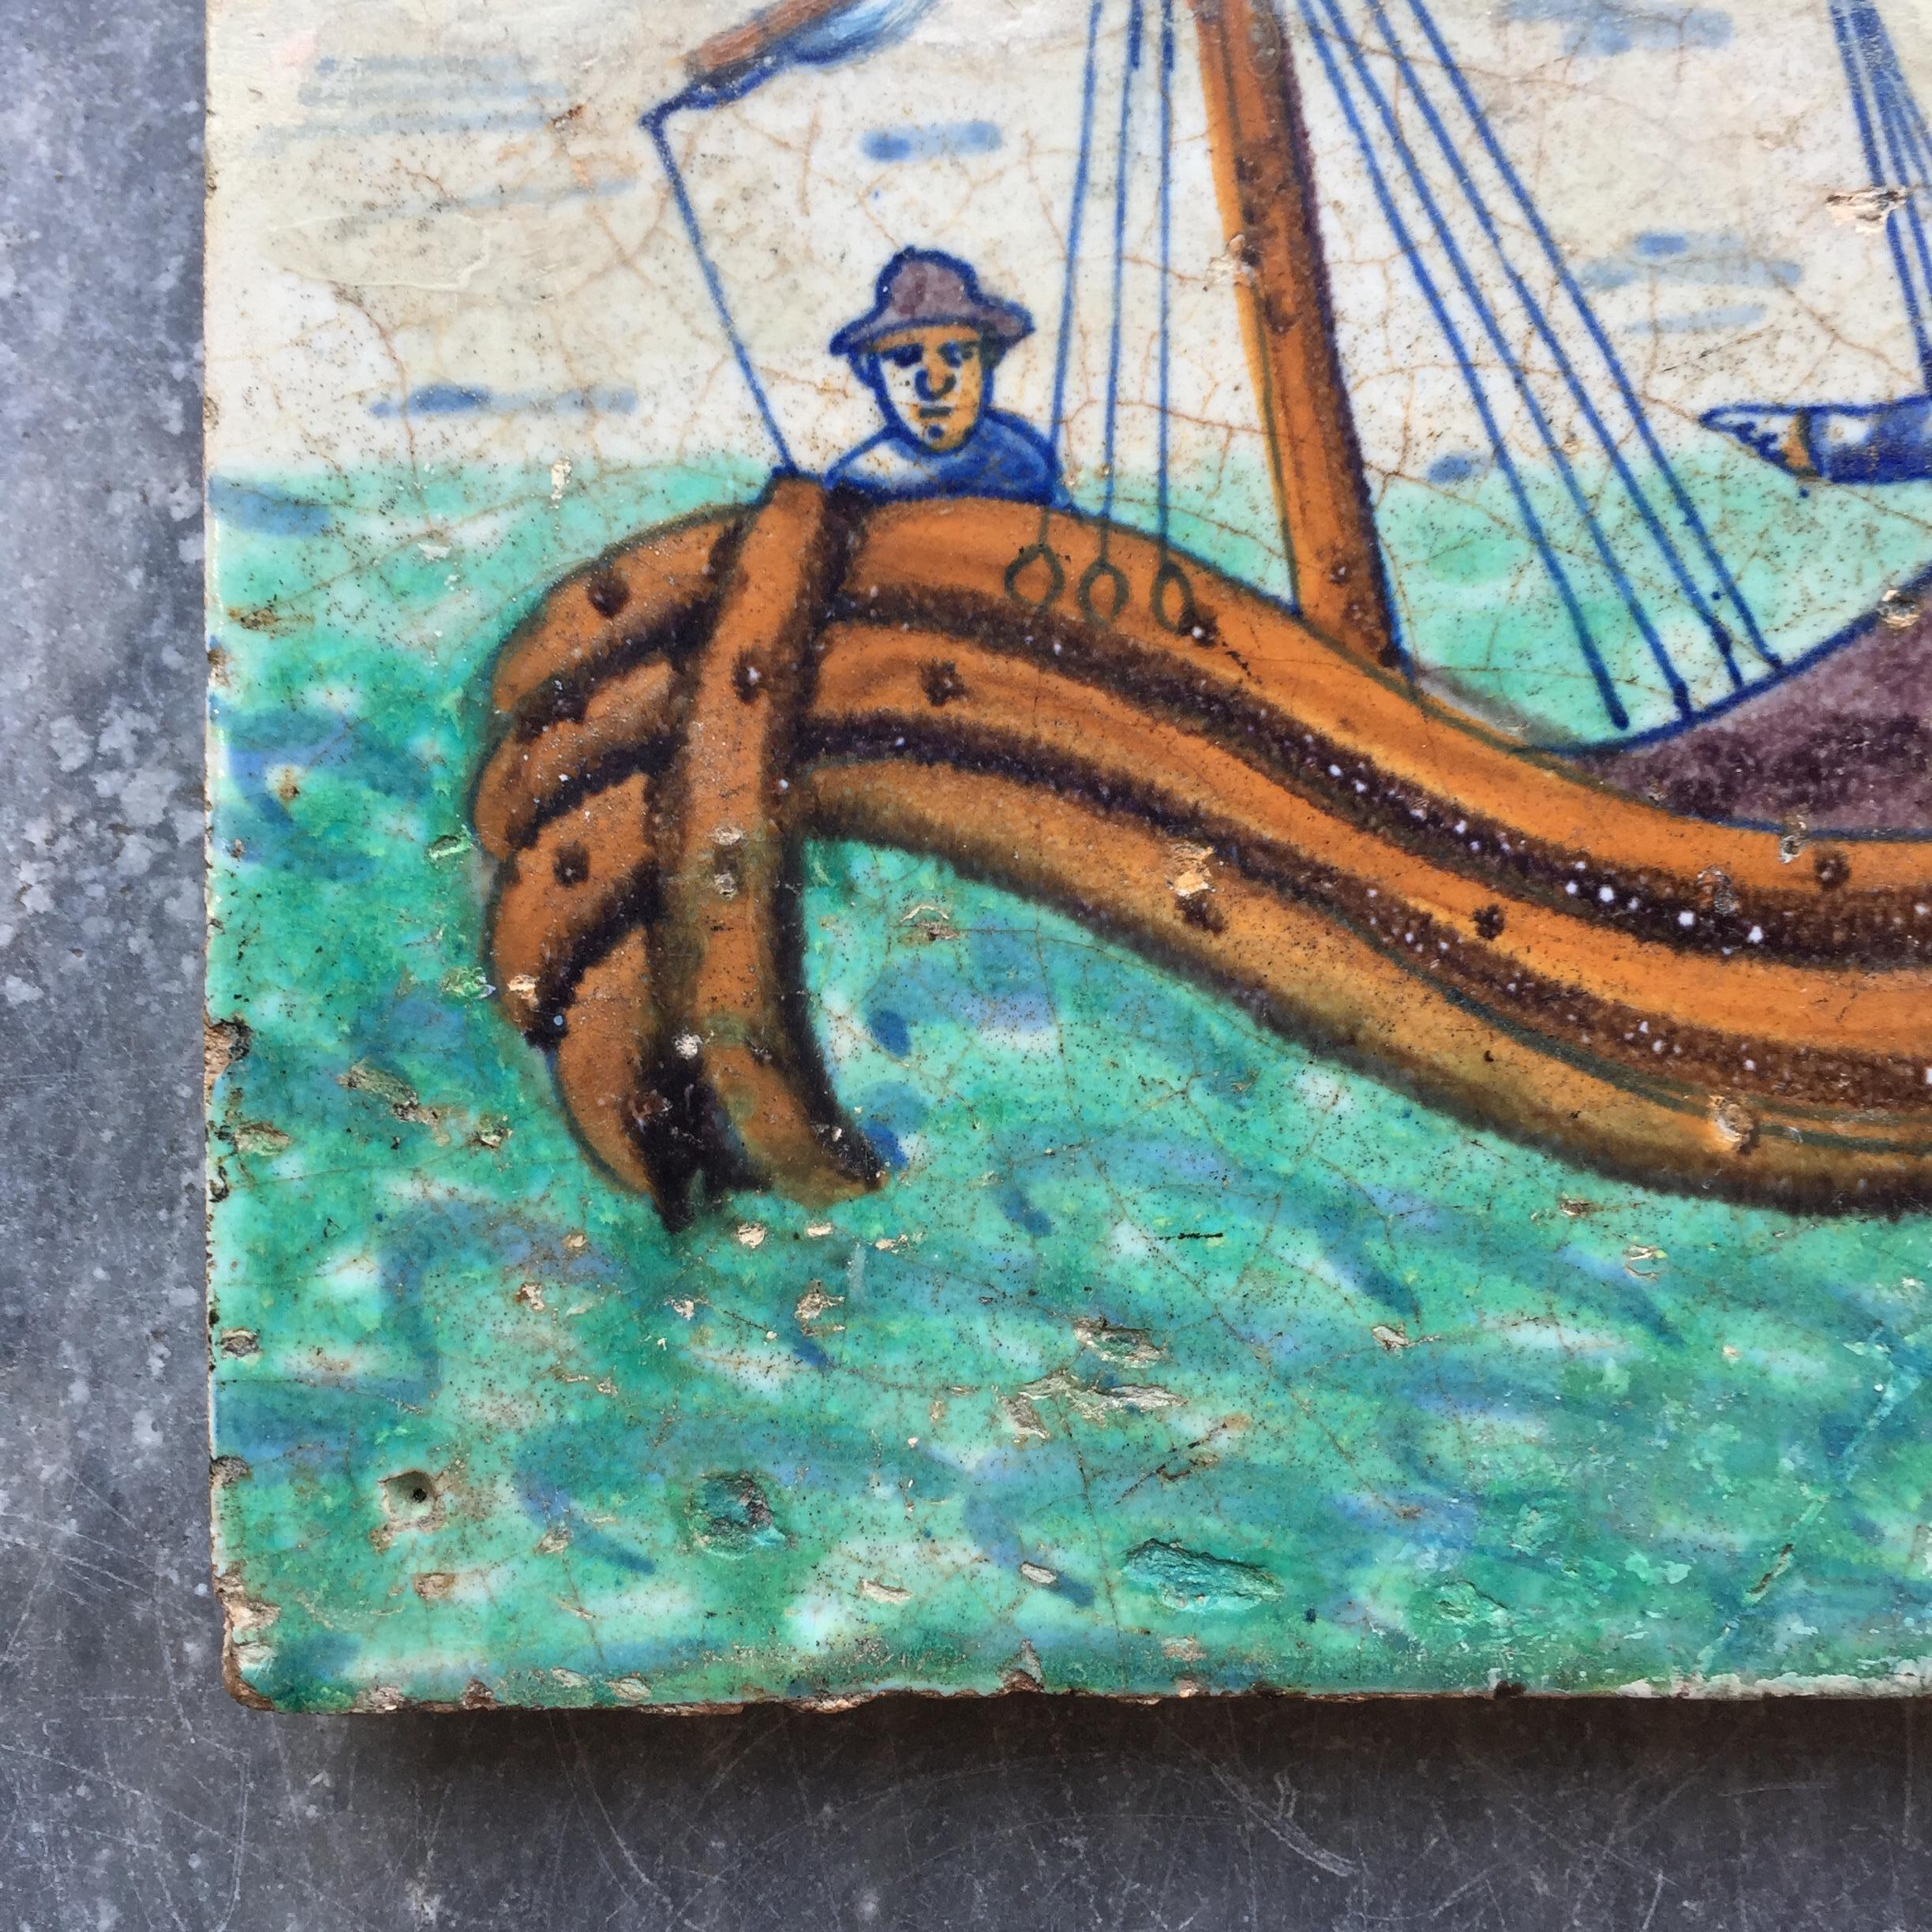 Glazed Extremely Rare Rotterdammer Tile with Two Men in a Boat, Early 17th Century For Sale